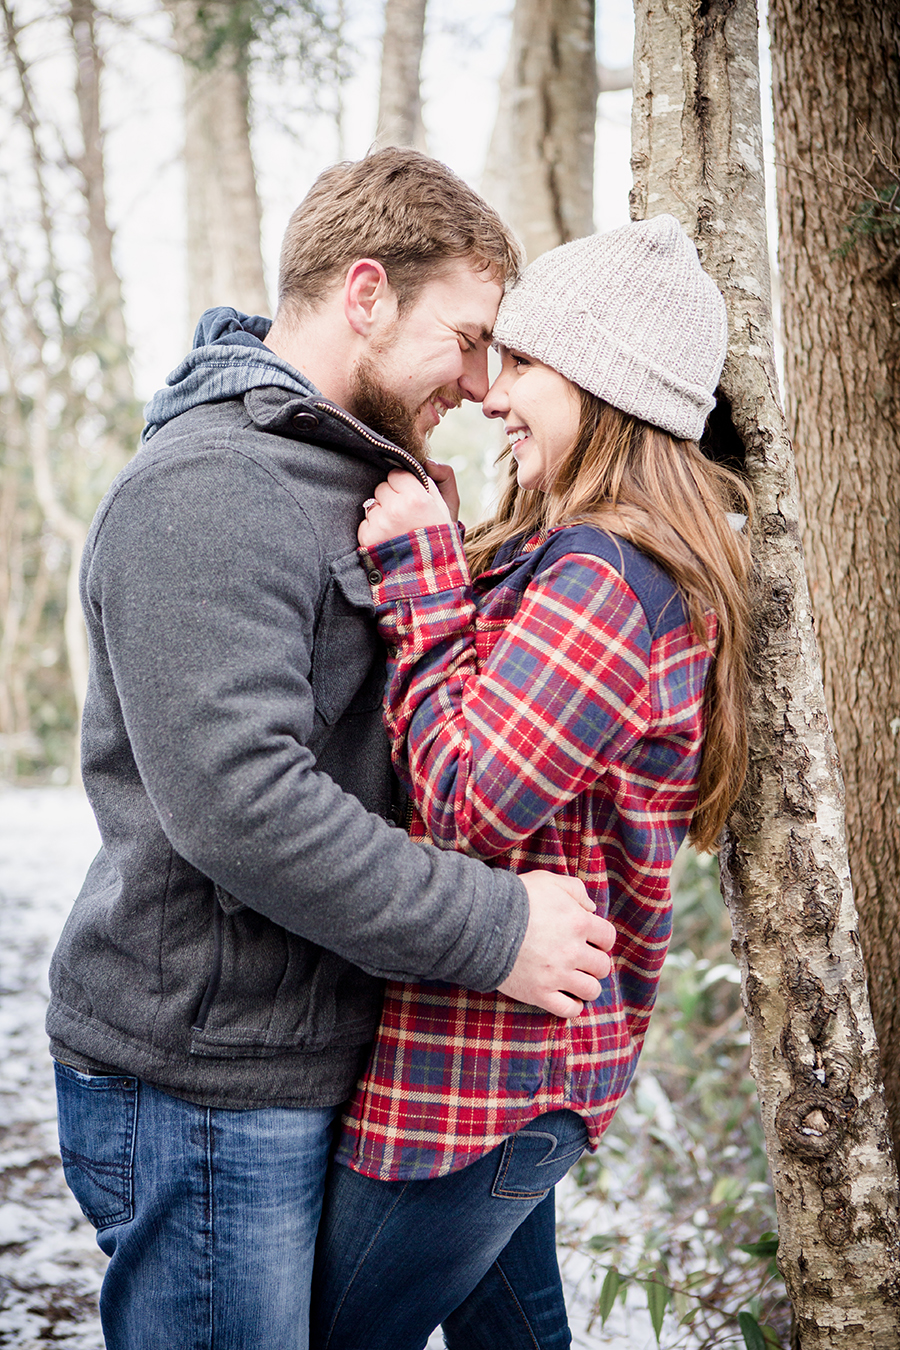 She pulls his jacket in engagement photo by Knoxville Wedding Photographer, Amanda May Photos.